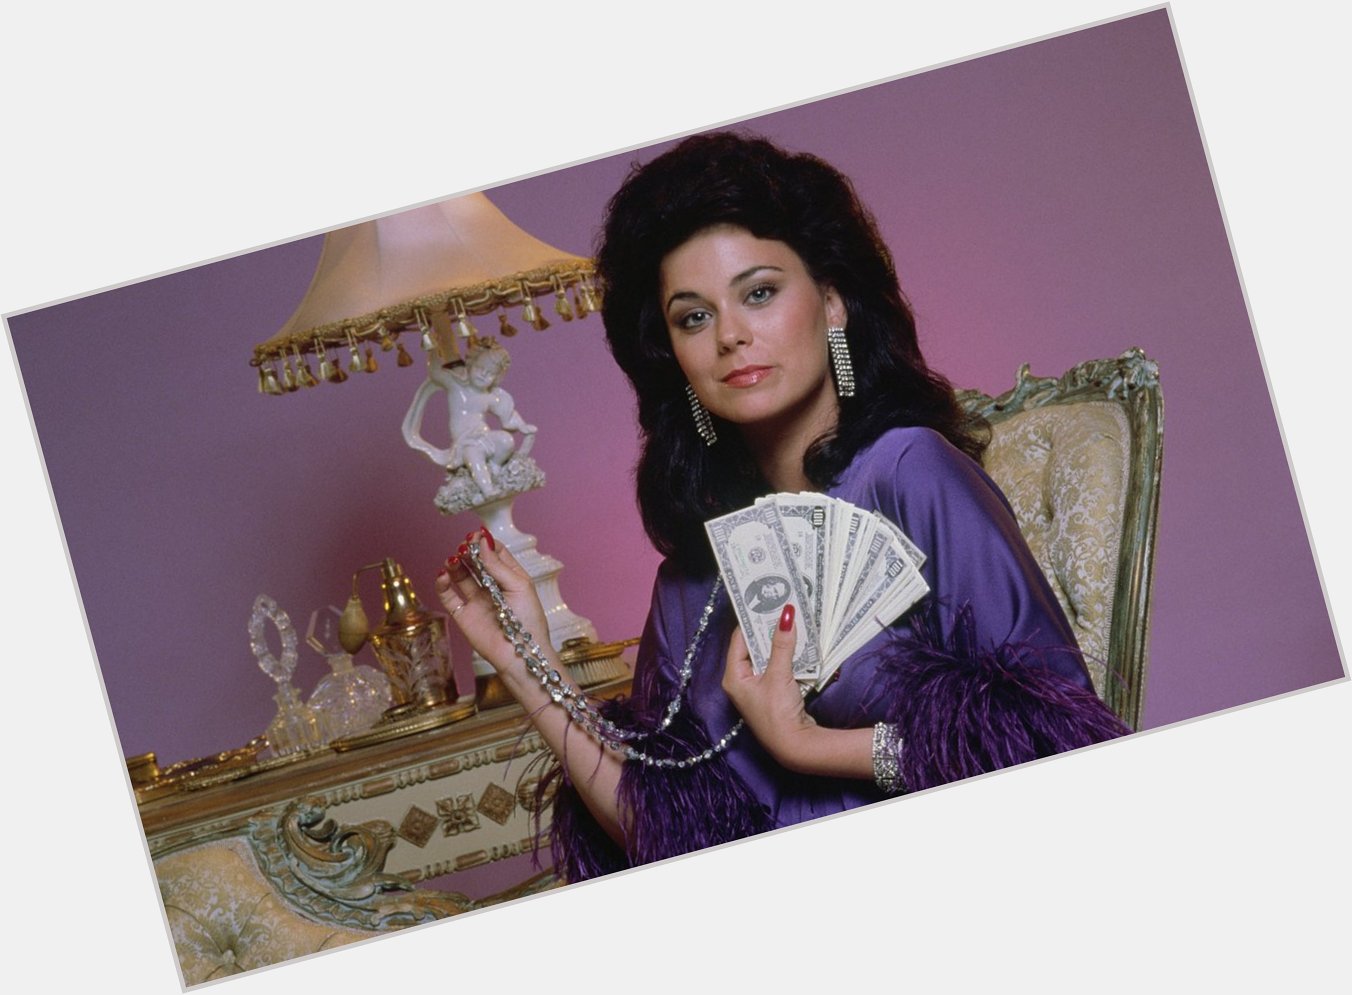 Happy birthday to a fabulous scene-stealer of the small screen, two-time Emmy nominee Delta Burke! 